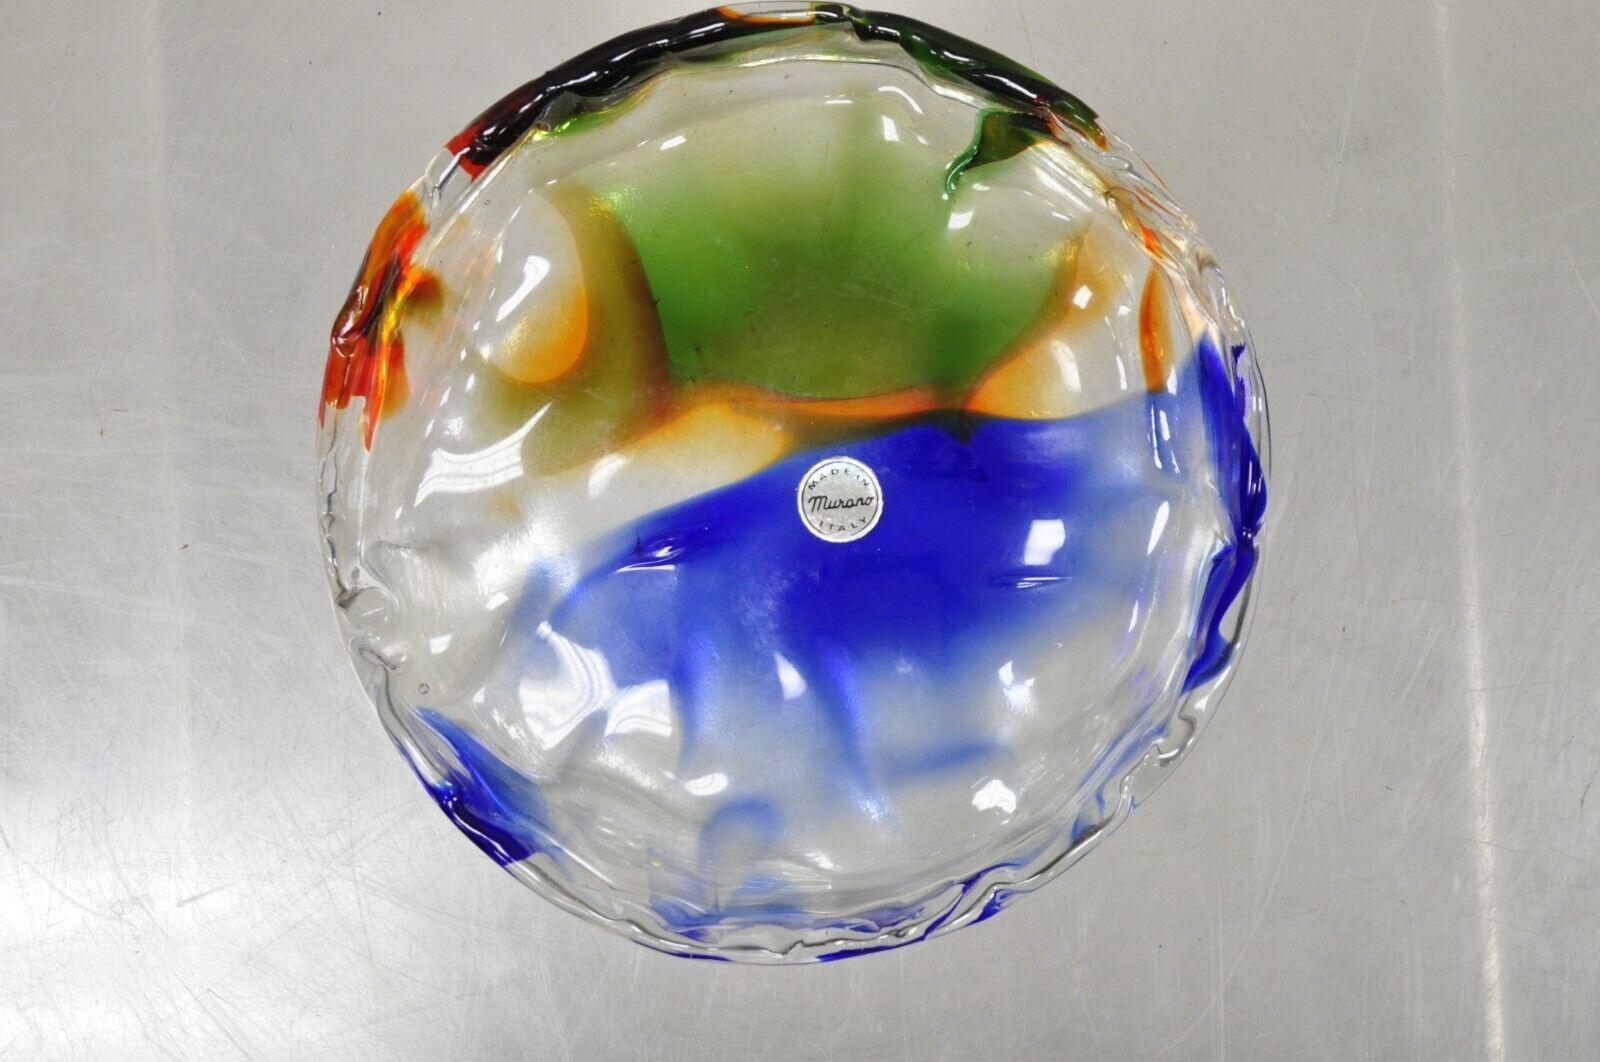 Vintage Mid-Century Modern Italian Murano Blue Green Art Glass Ashtray Catchall In Good Condition For Sale In Philadelphia, PA